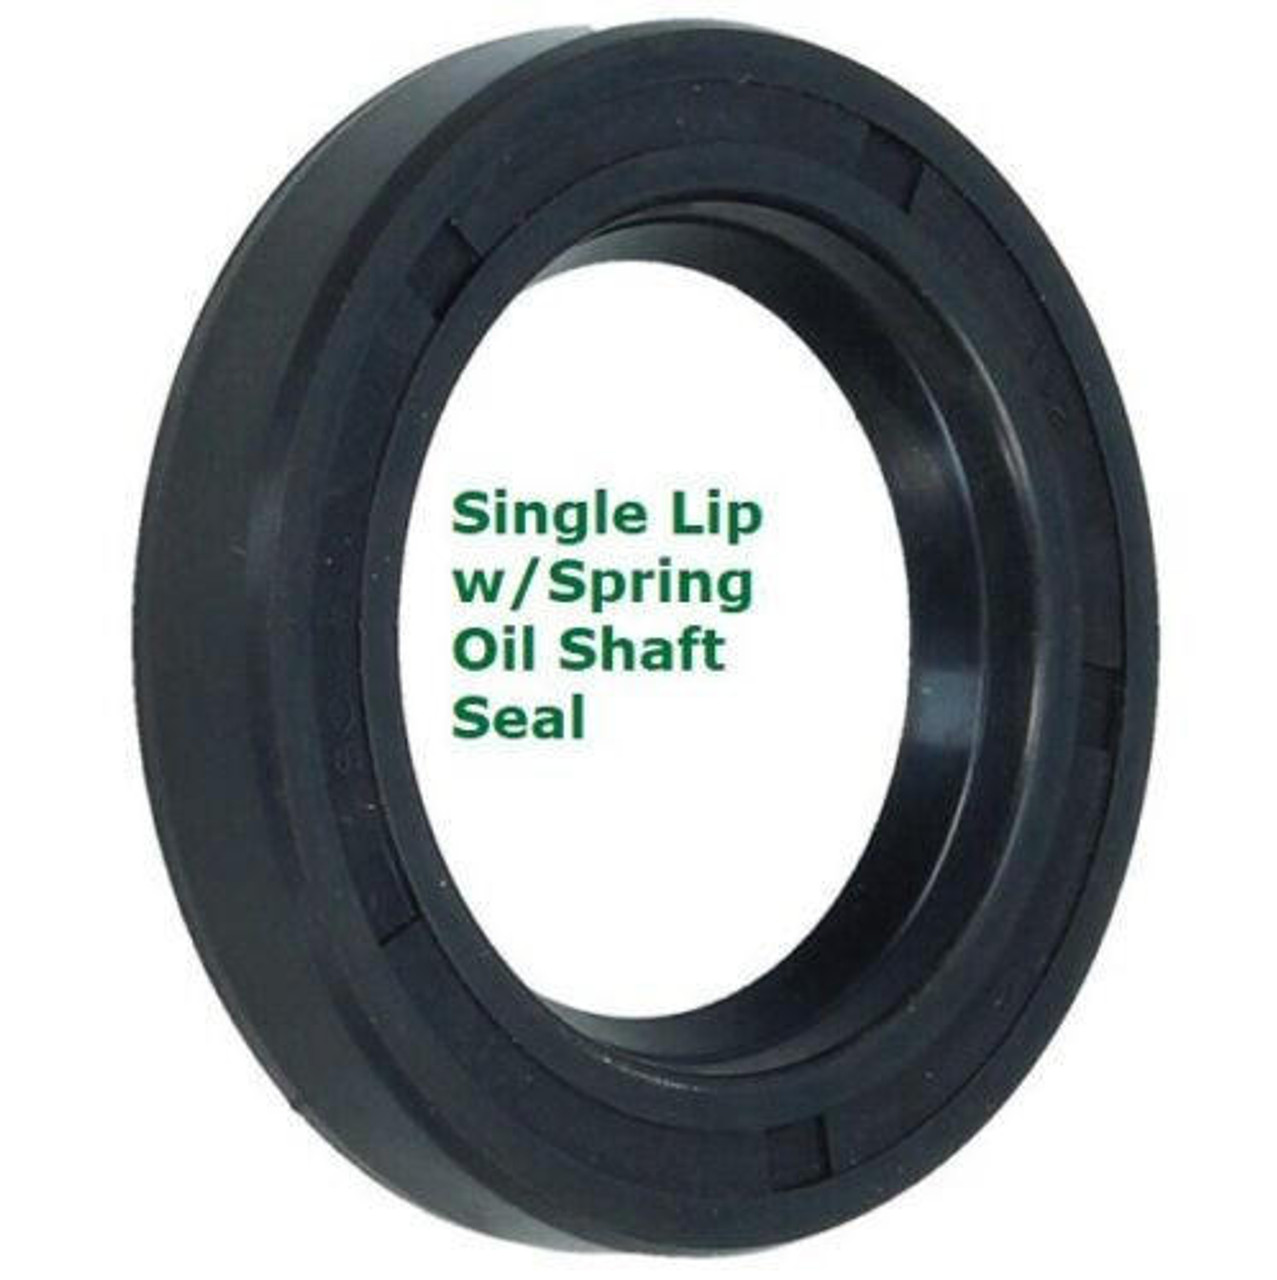 Metric Oil Shaft Seal 55 x 80 x 13mm   Price for 1 pc